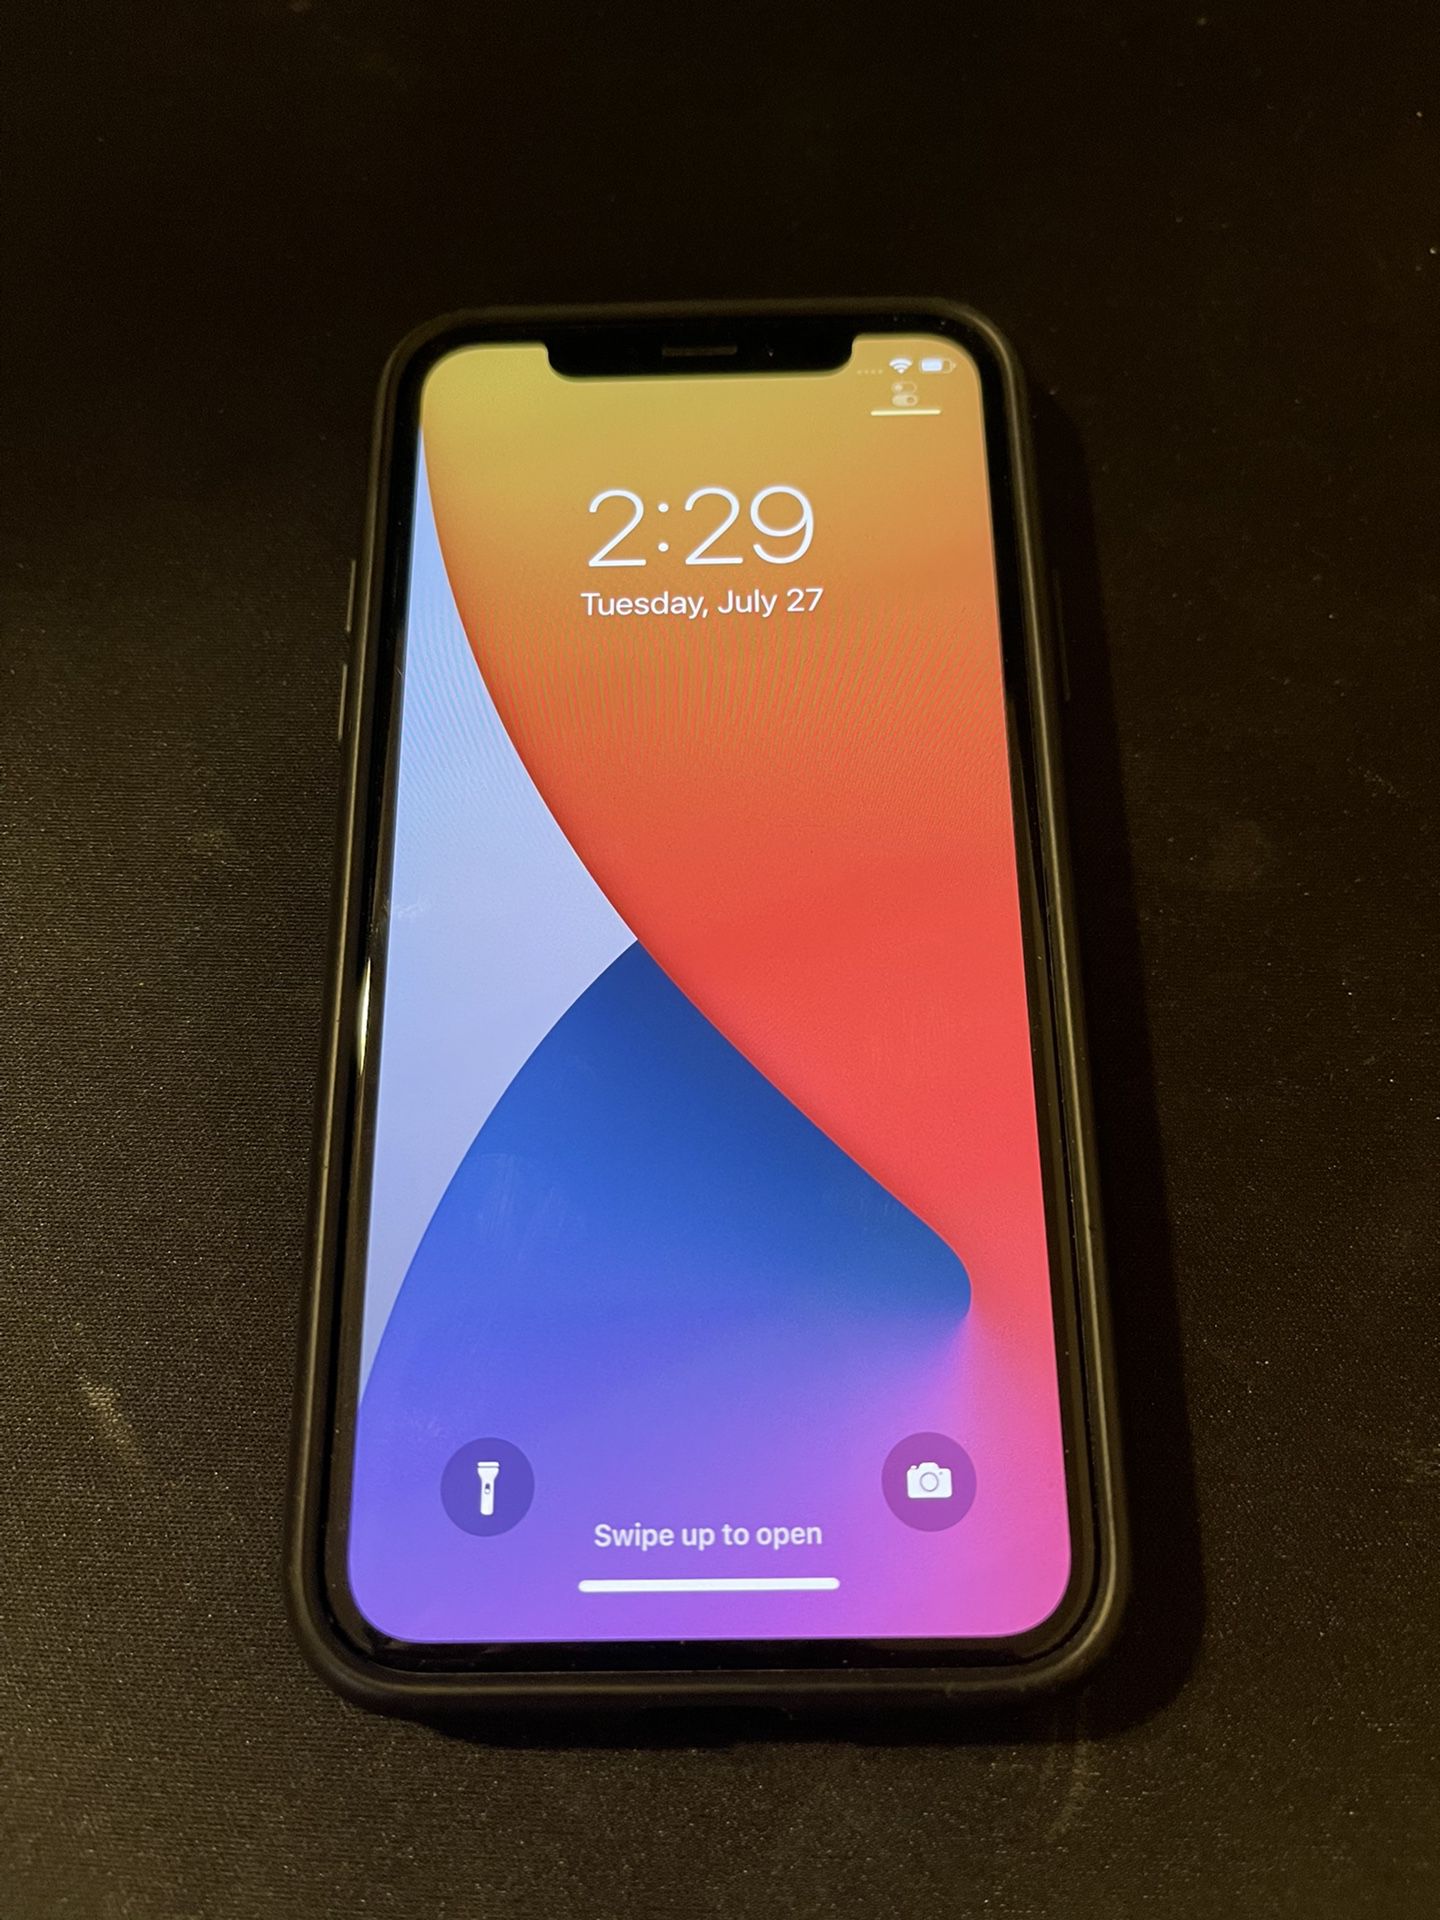 IPHONE X 256GB AT&T